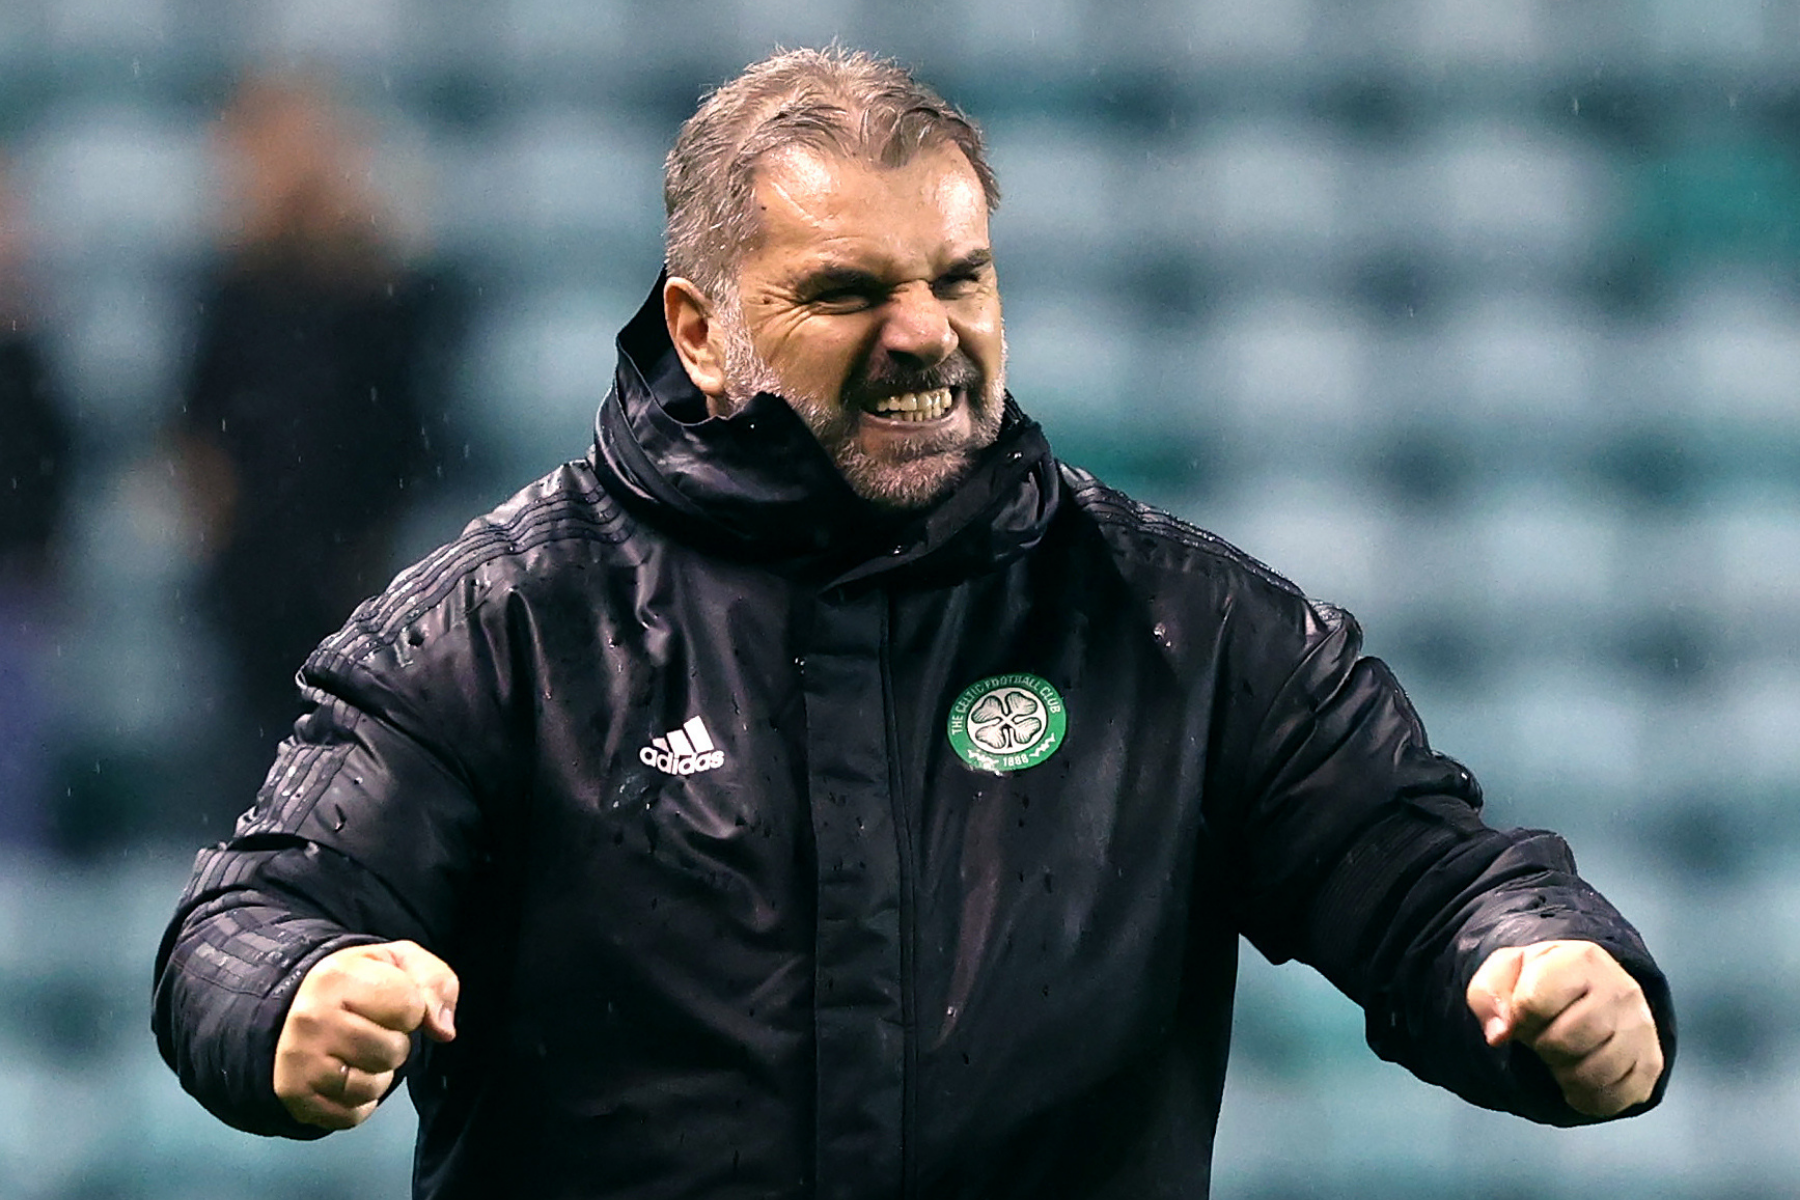 Celtic named 'best club to manage in UK' ahead of Rangers, Man Utd and Liverpool